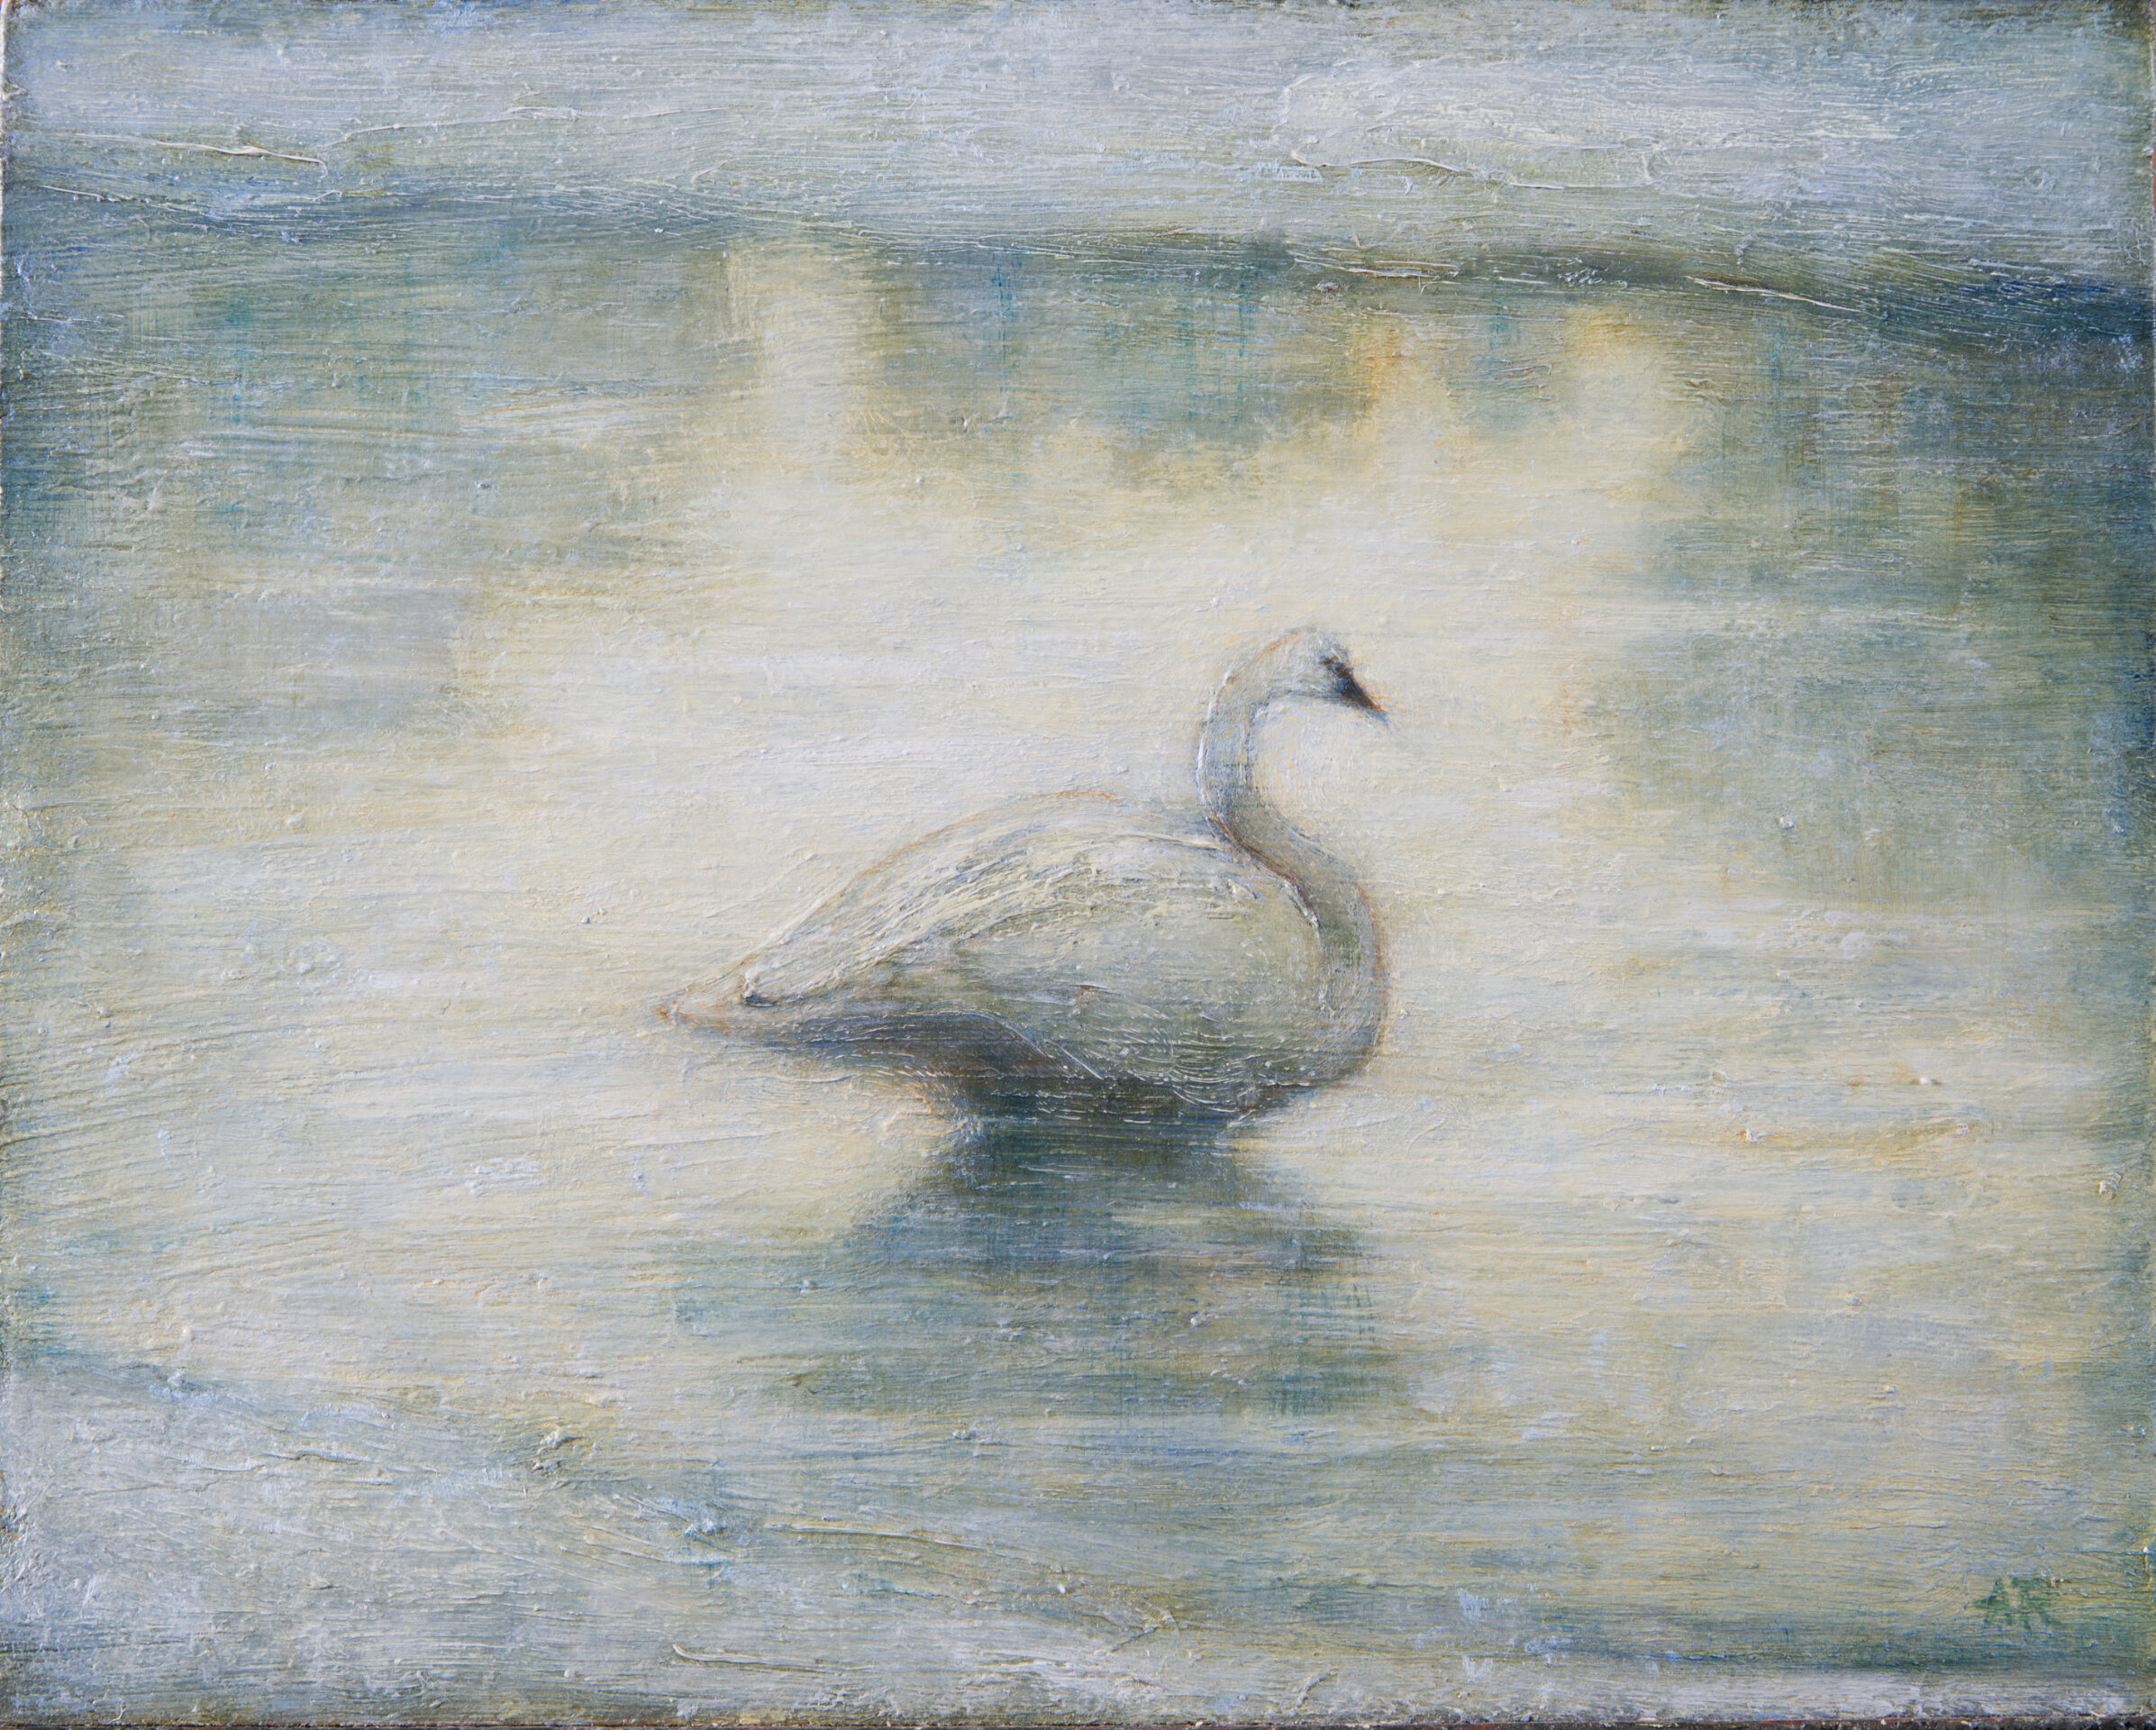 Winter Swans, 2020 - Painting 1